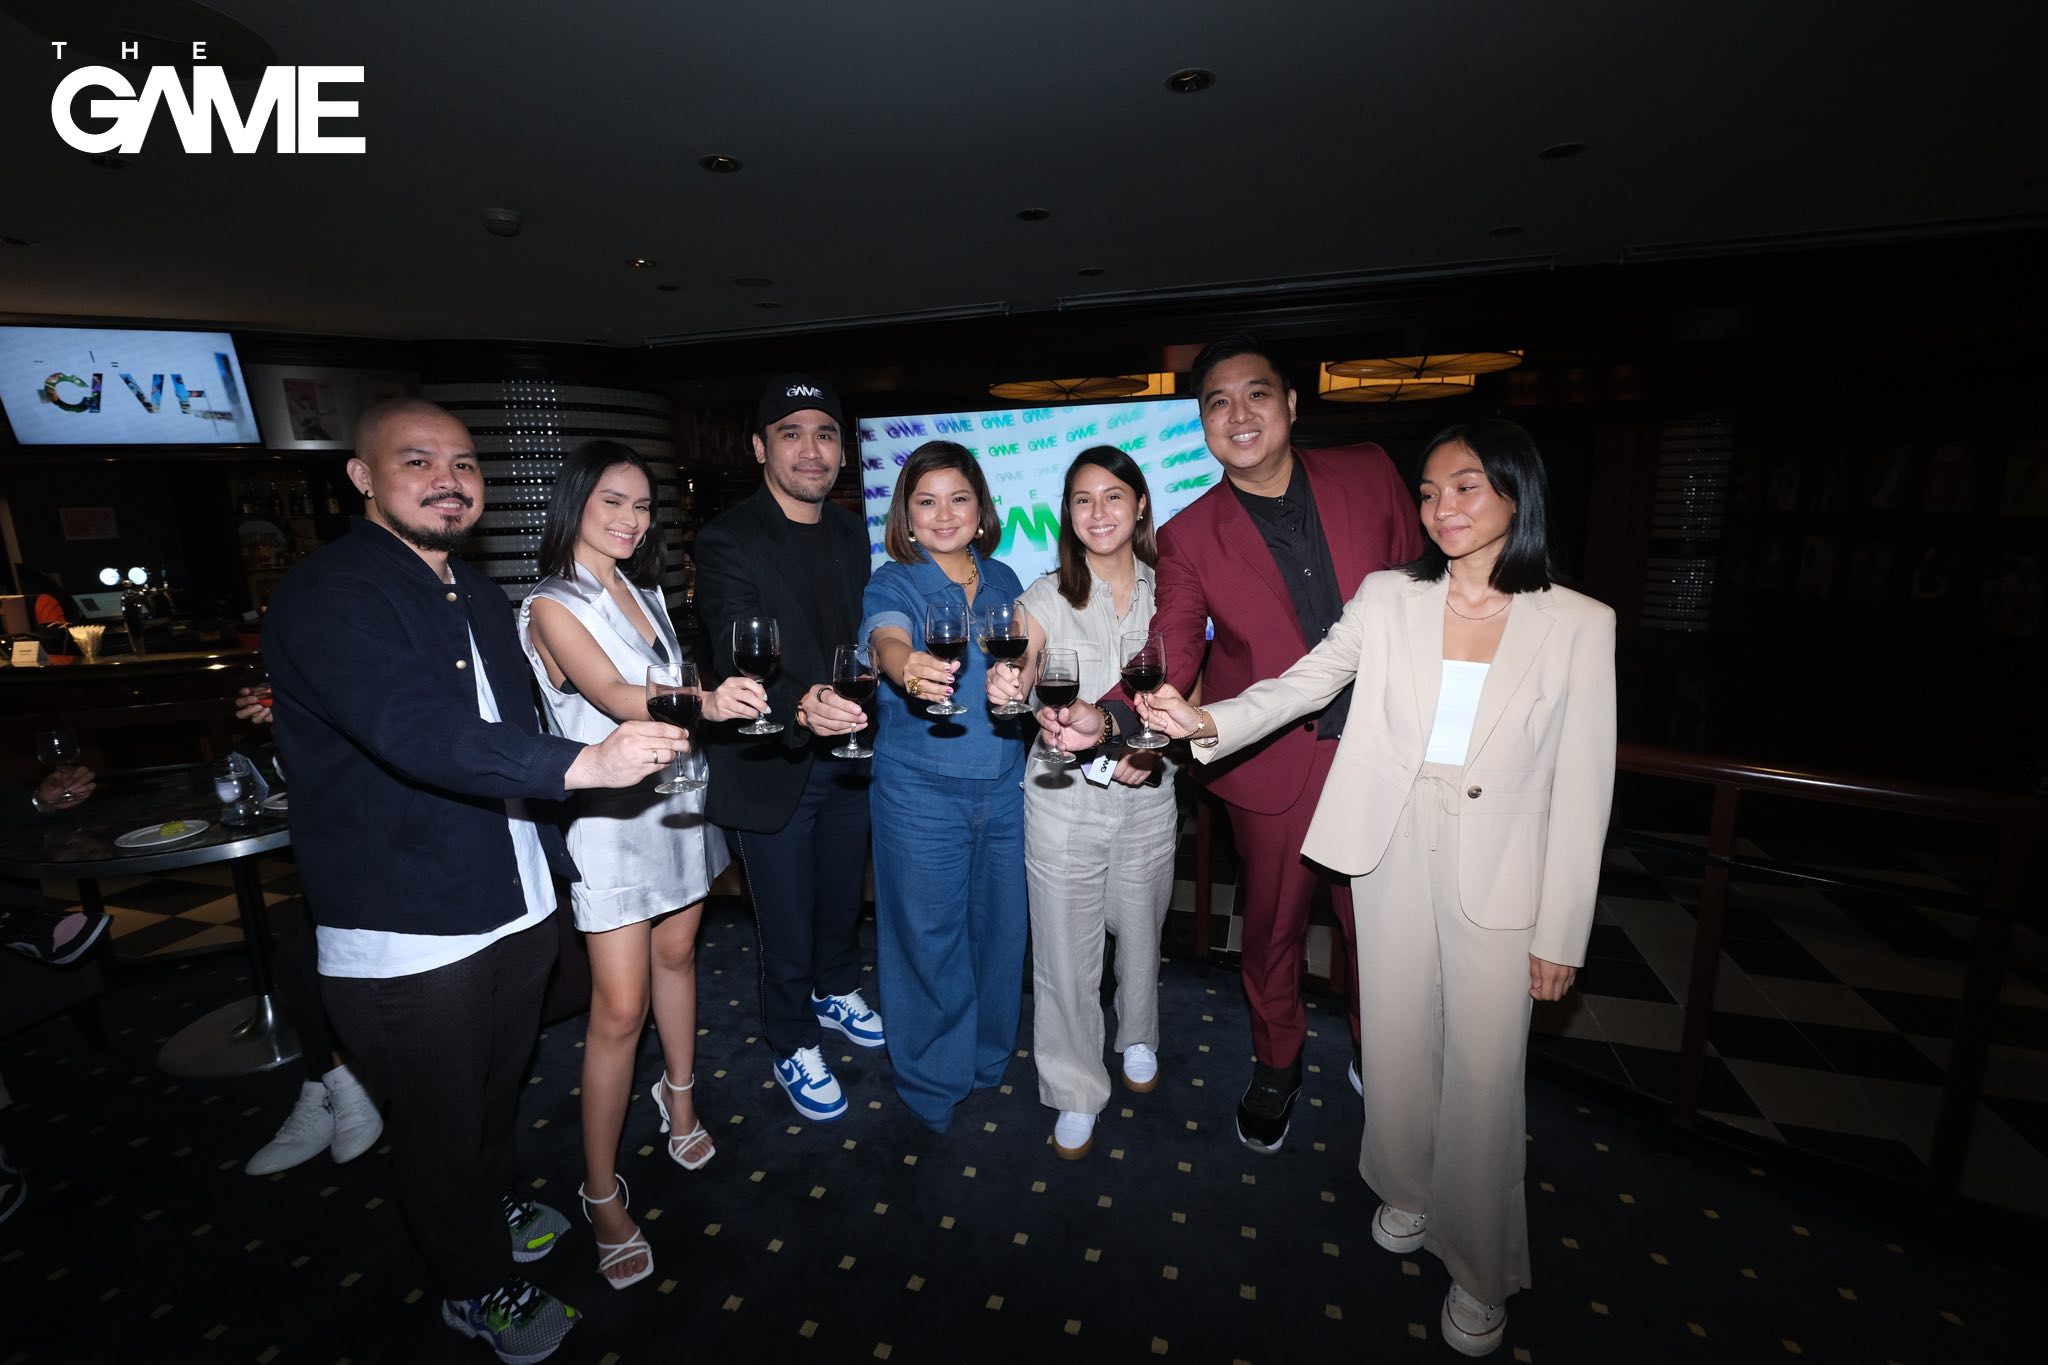 The GAME's team toasting the brand's launch